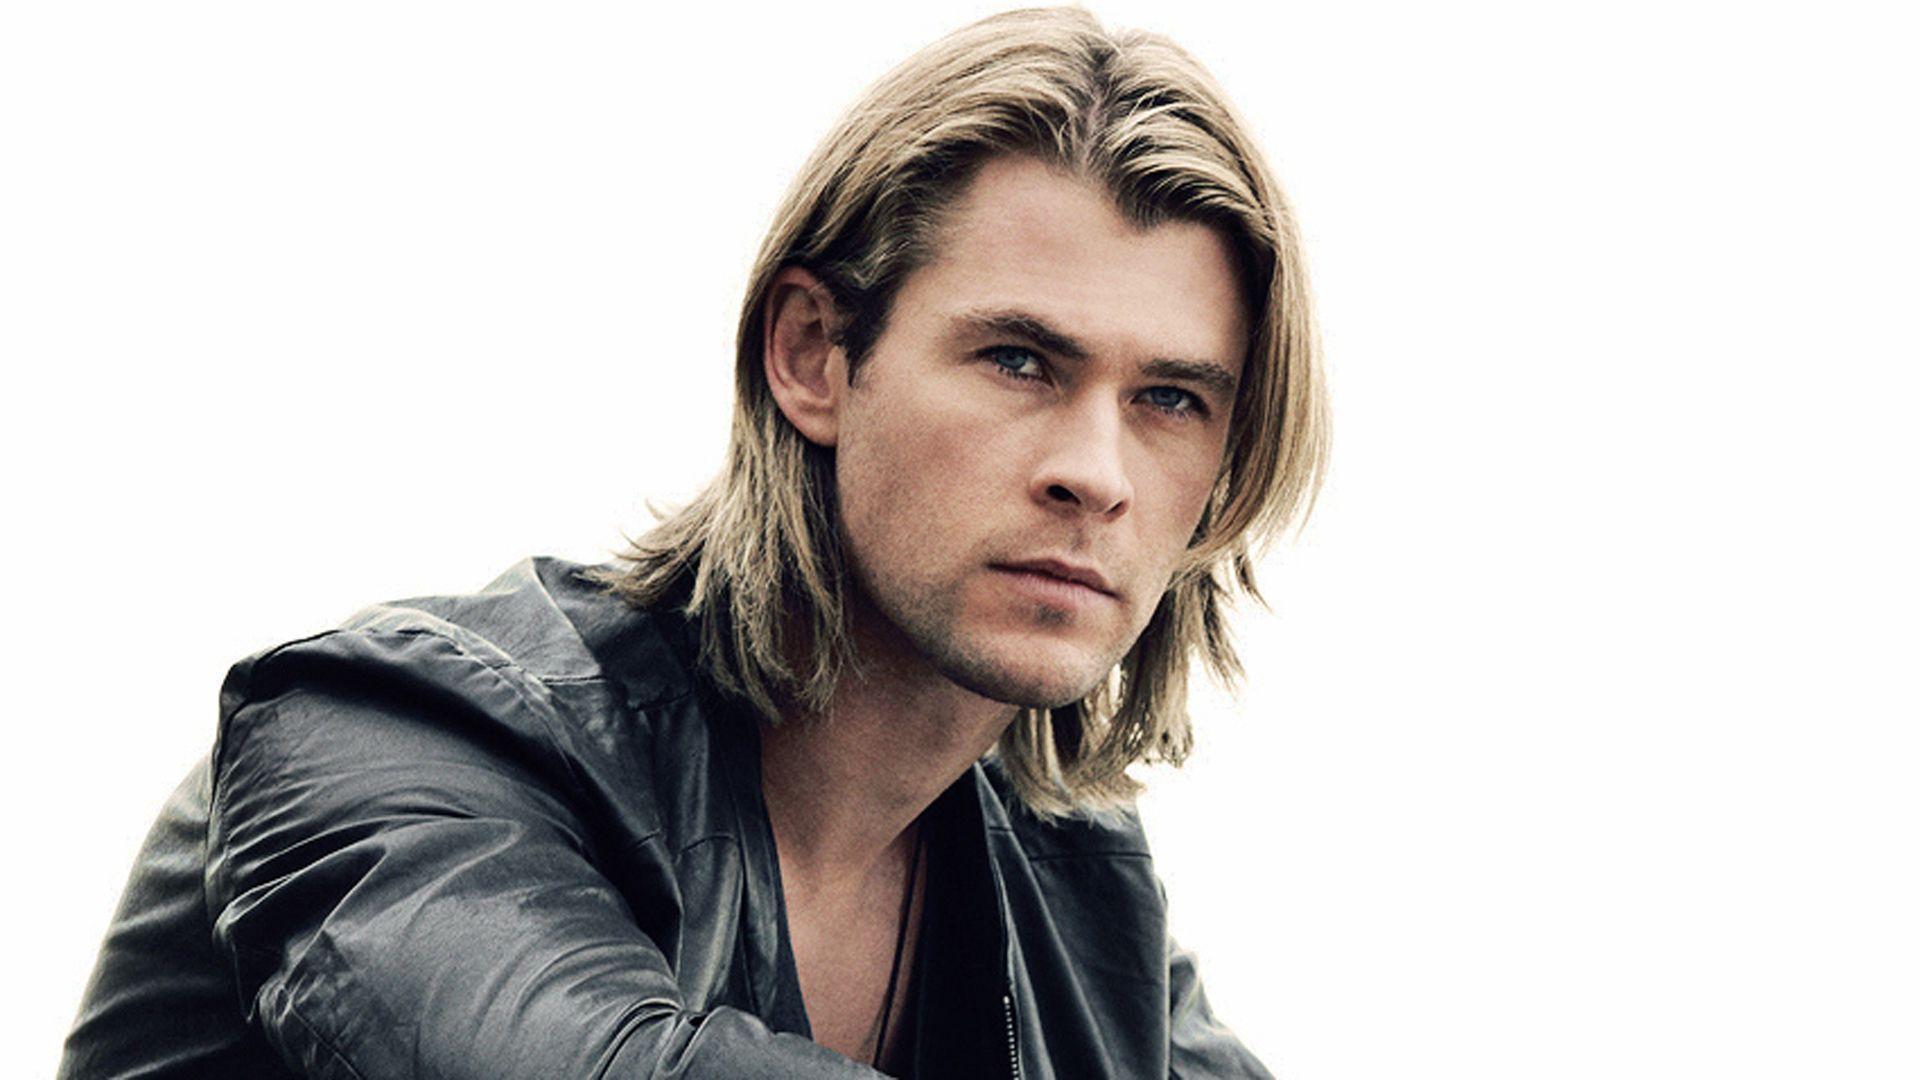 Chris Hemsworth Wallpaper Image Photo Picture Background